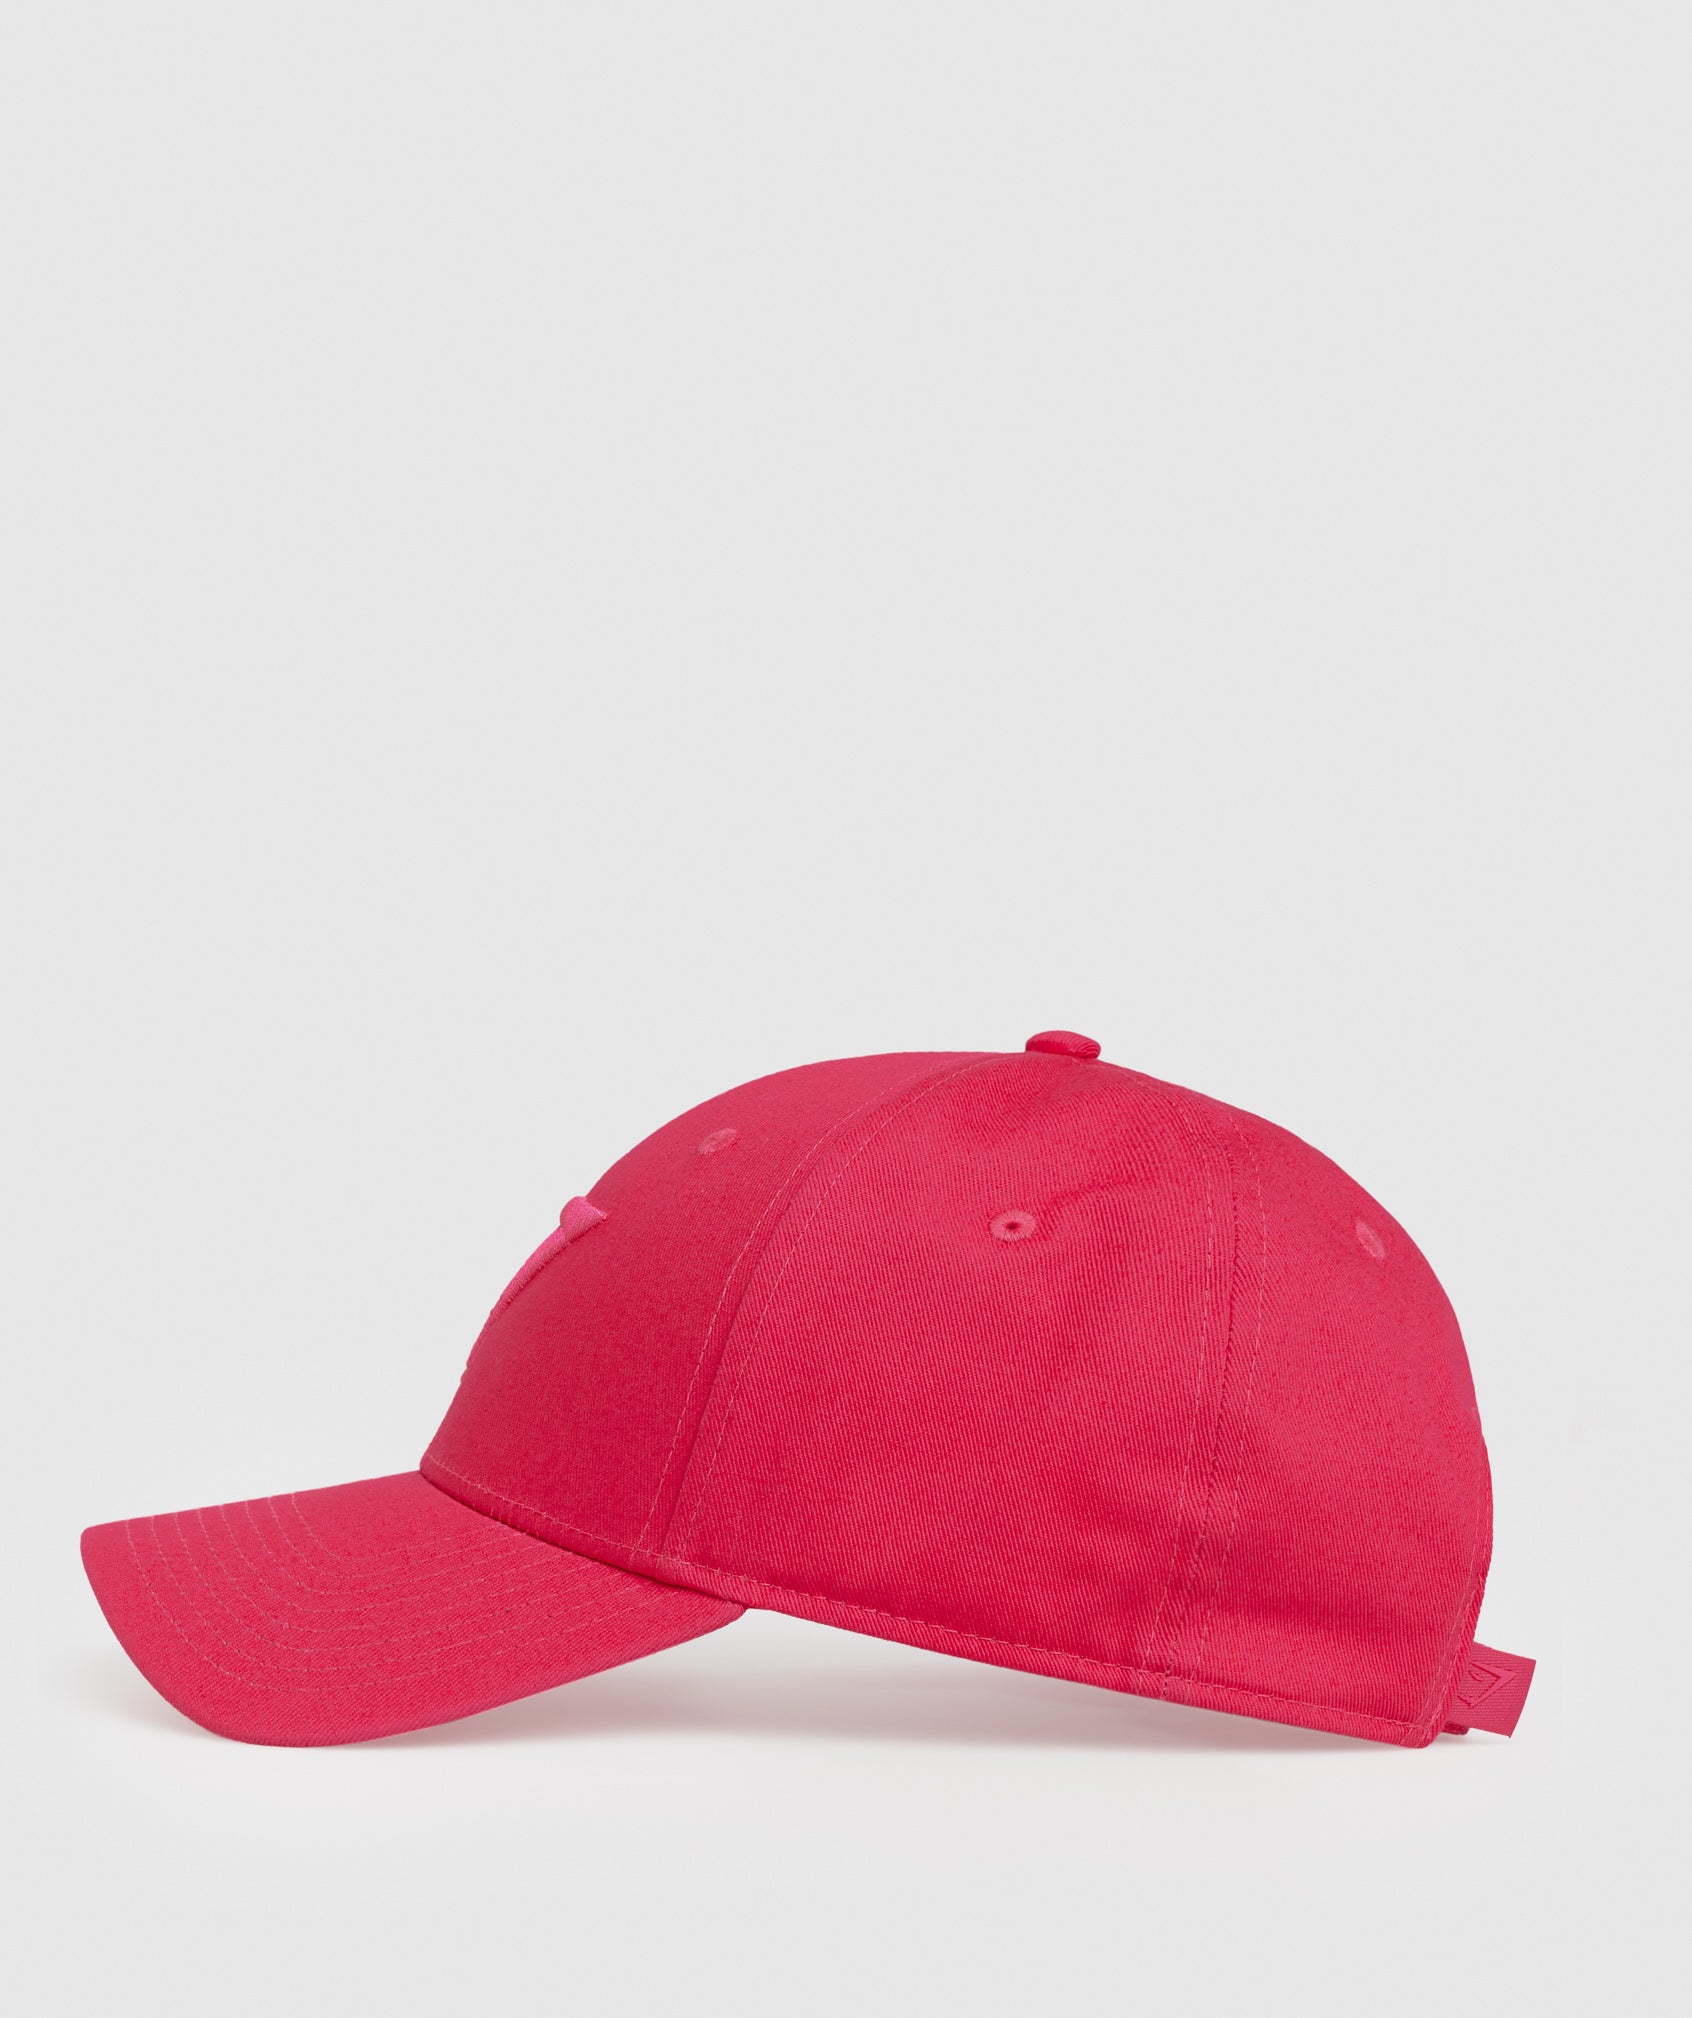 Planet Fitness Pink Cap - $8 (20% Off Retail) - From Grïn